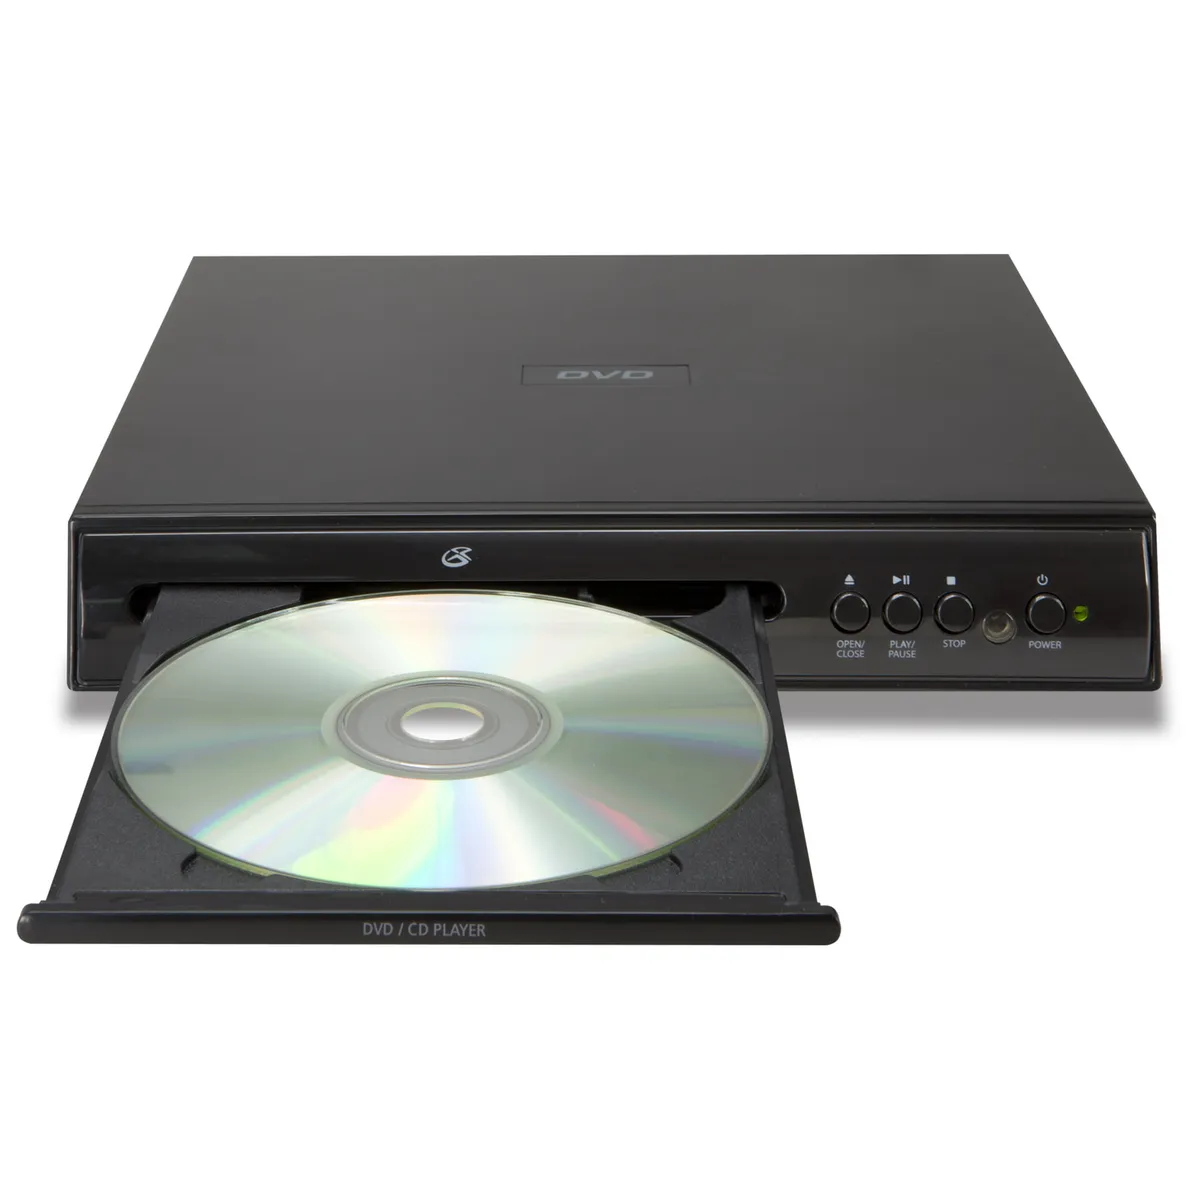 insert disc into dvd player